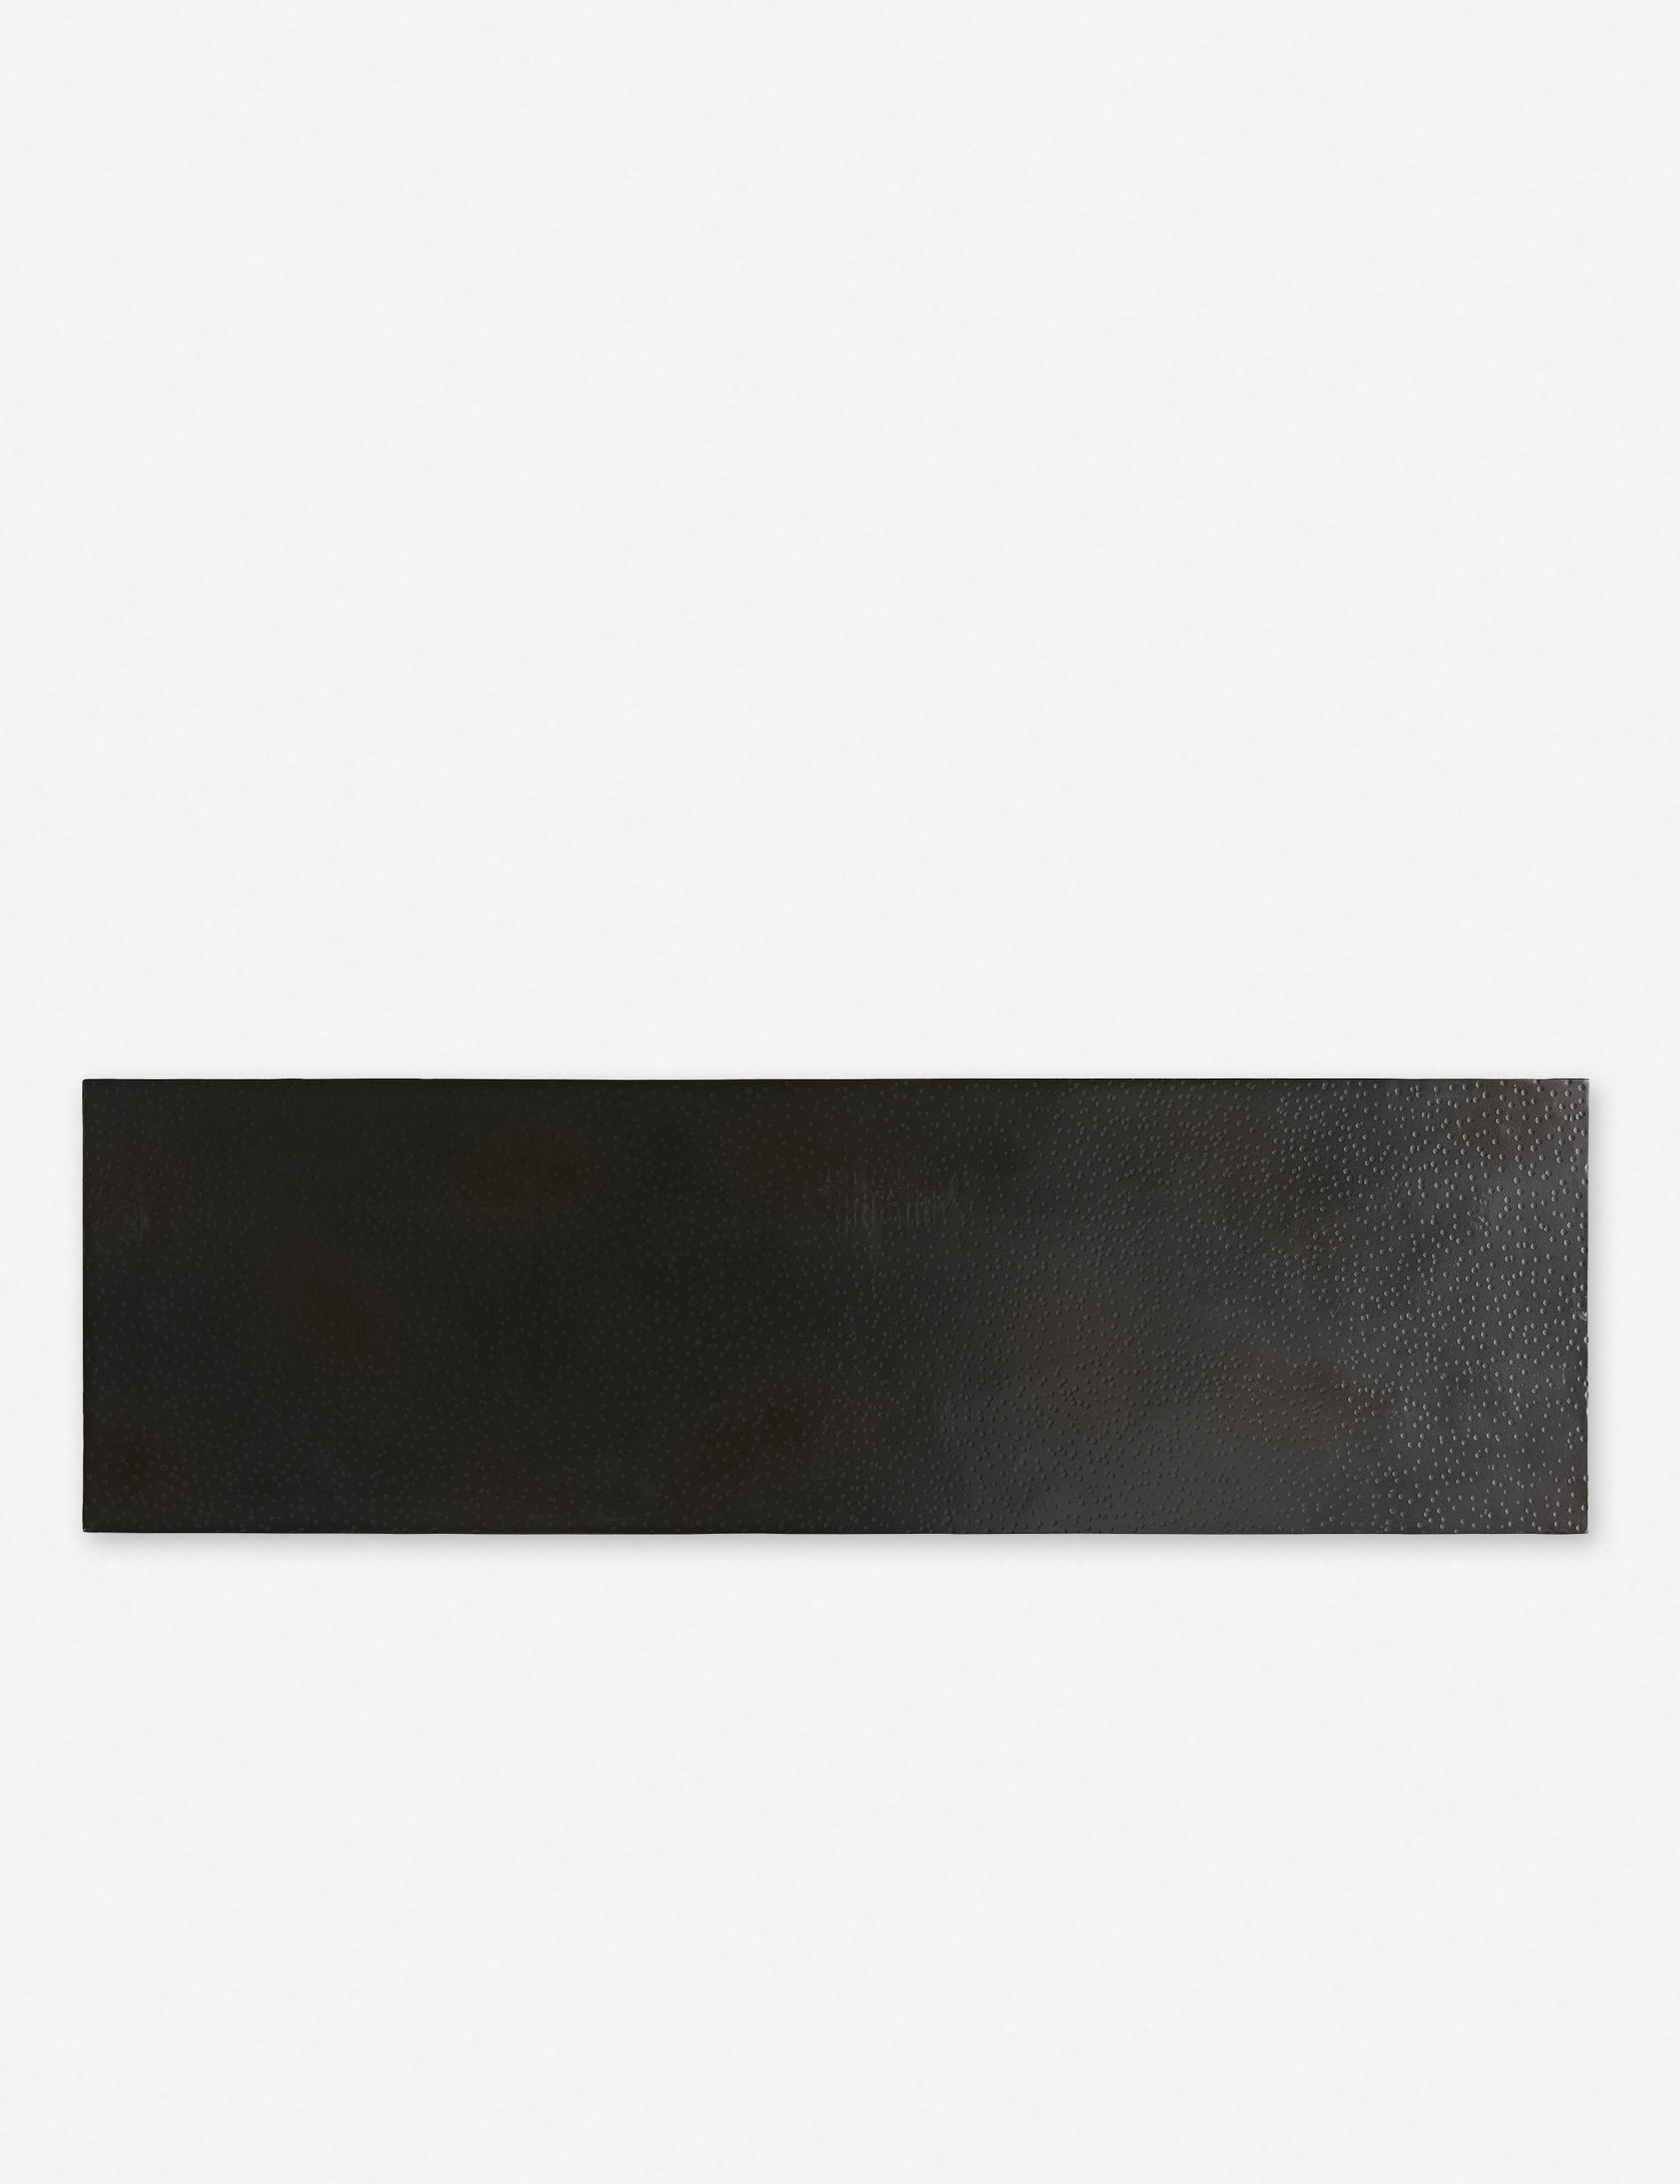 Hogan Console Table by Arteriors - Image 3